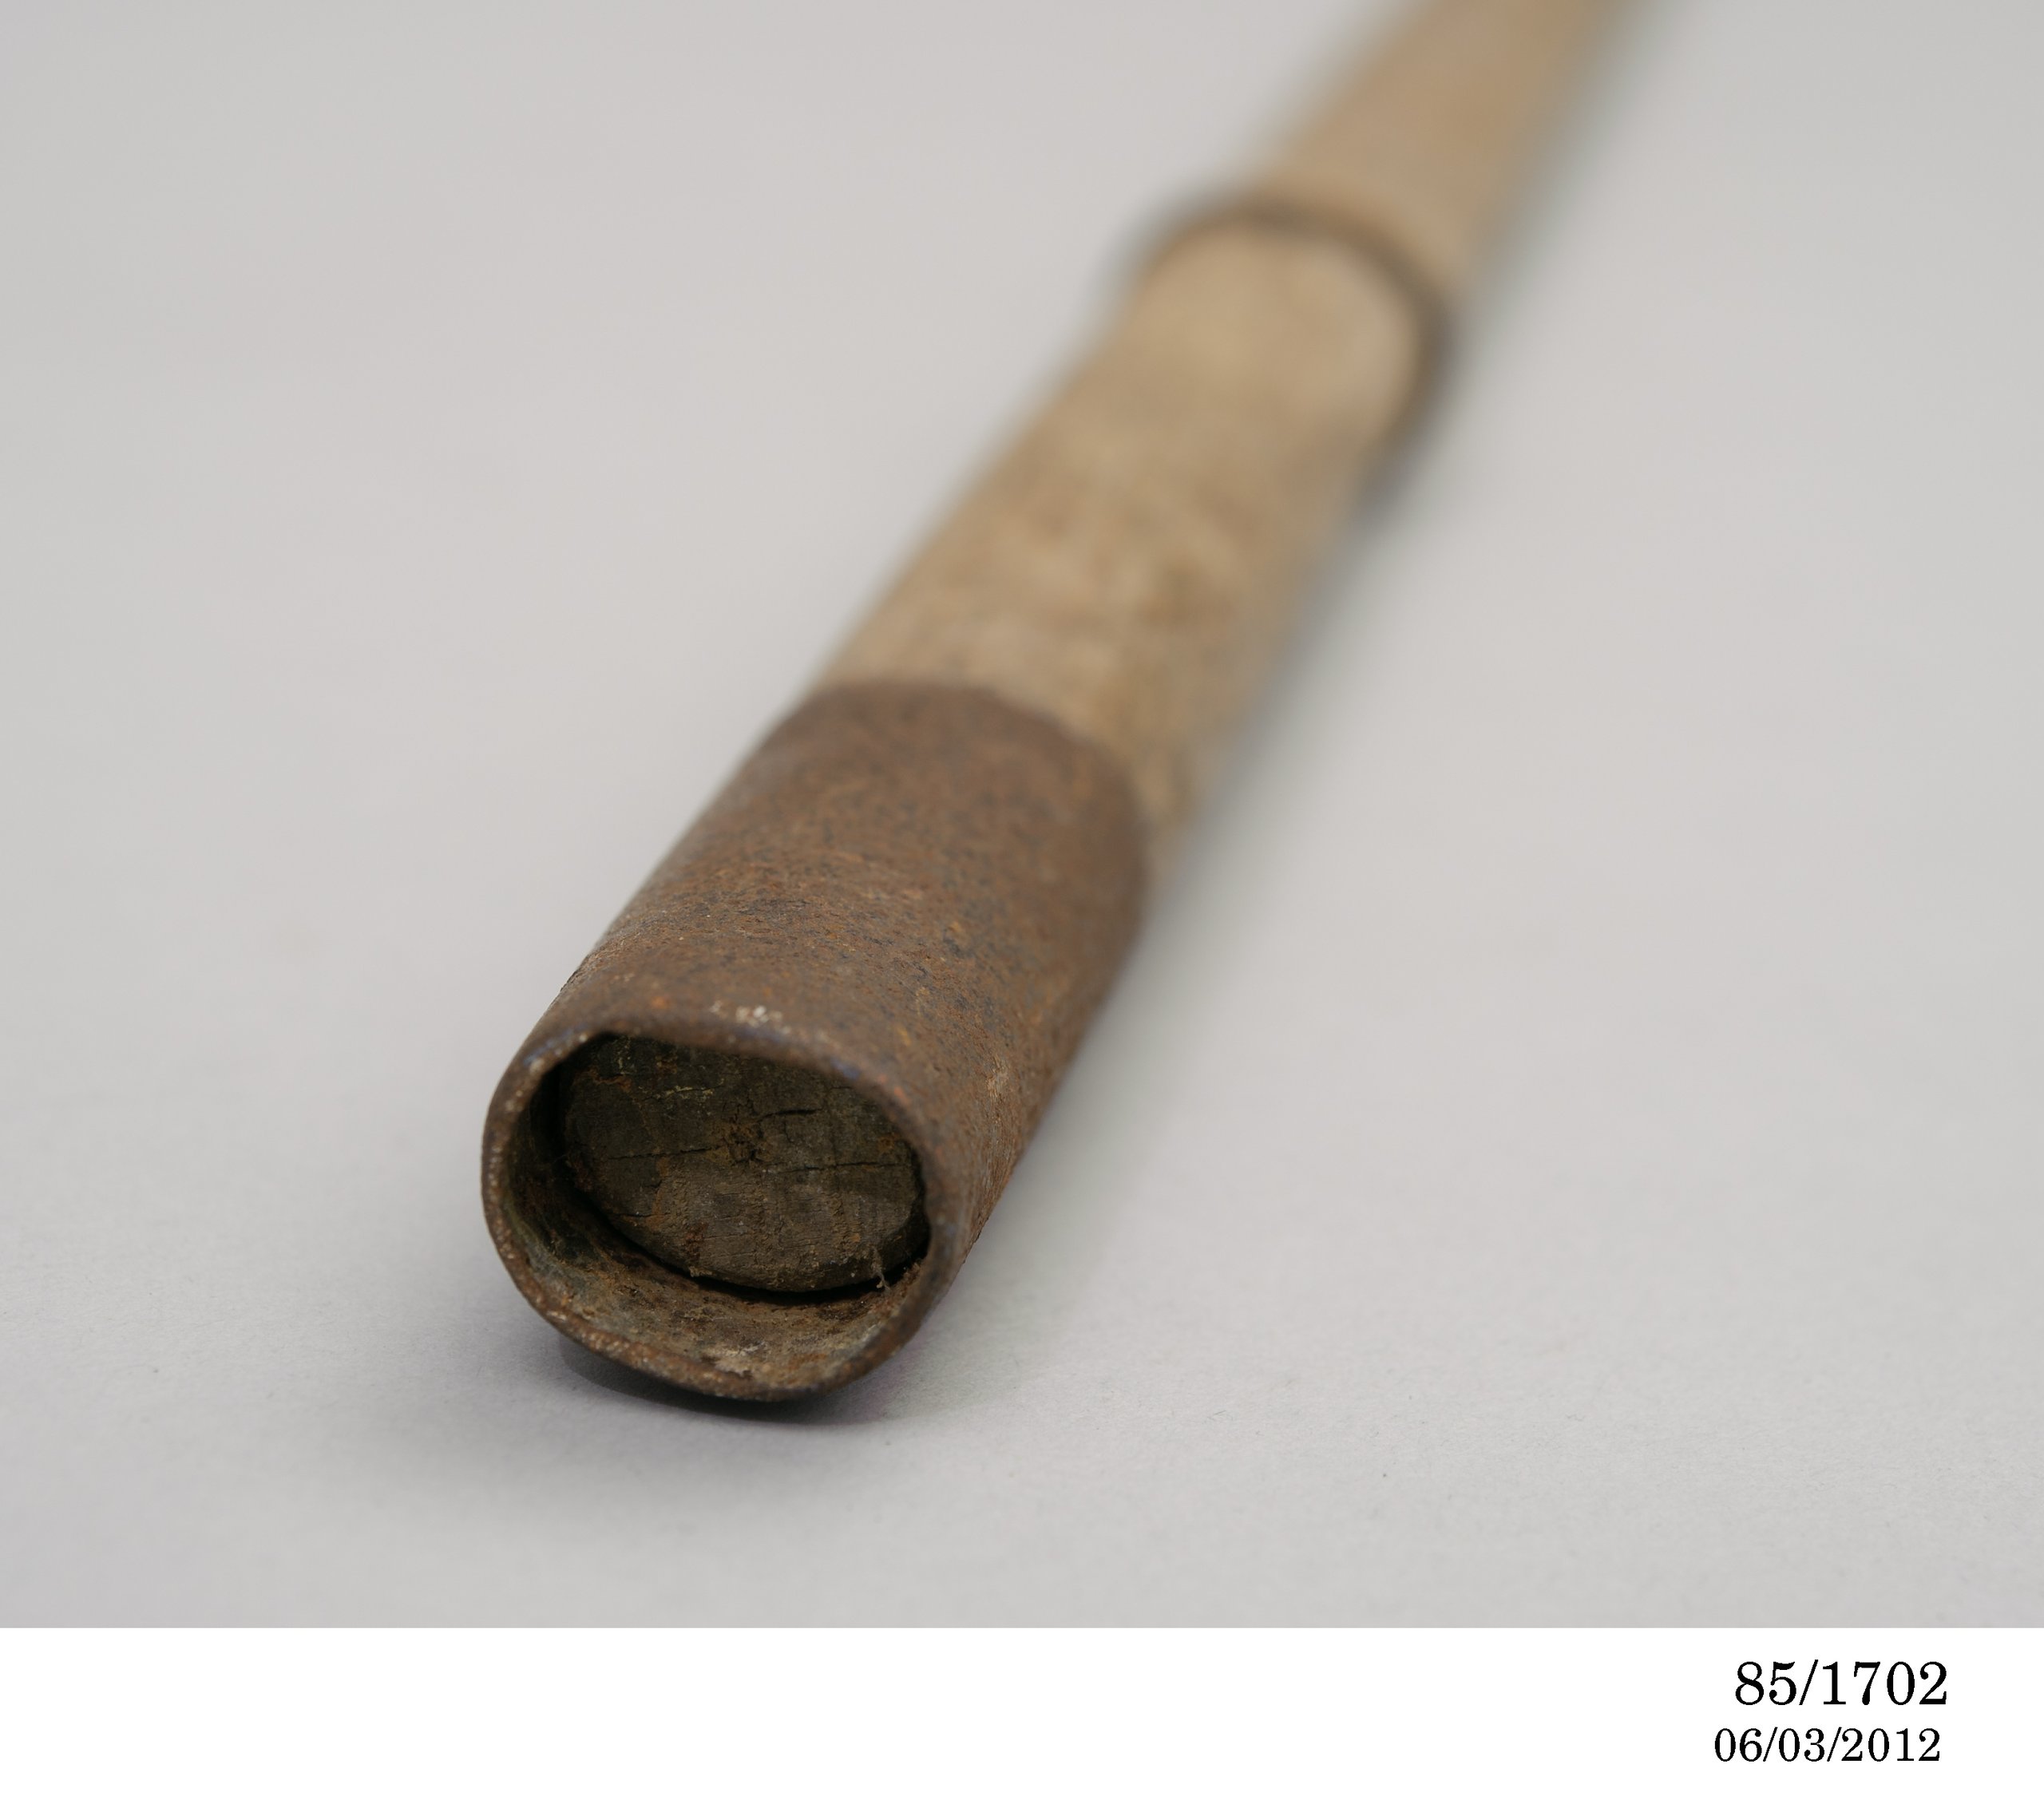 Ice axe used on Dr Douglas Mawson's Australasian Antarctic Expedition